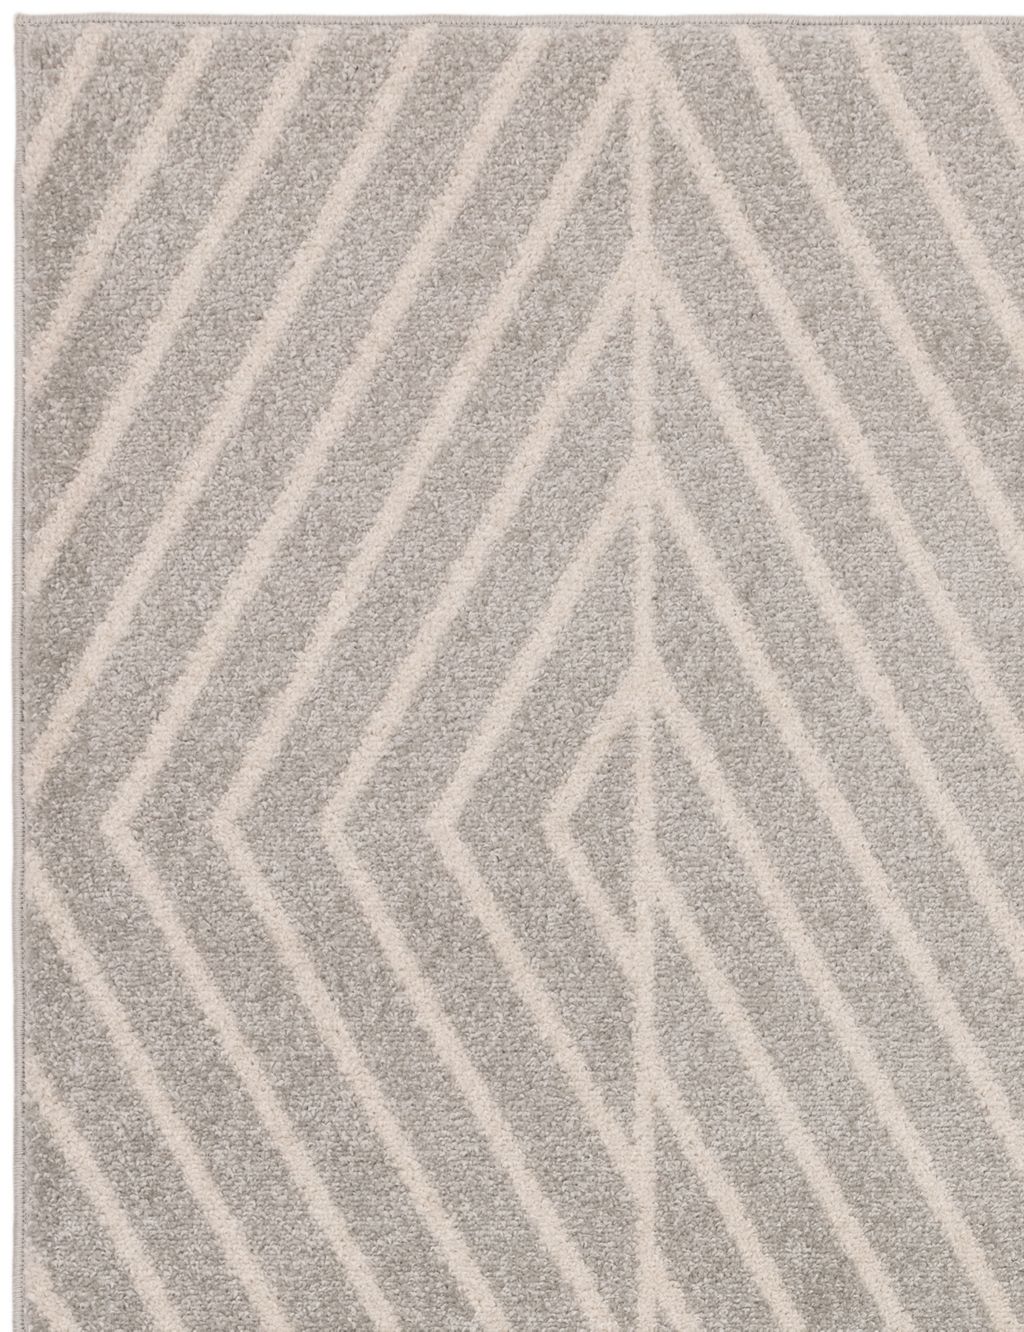 Muse Linear Rug image 4